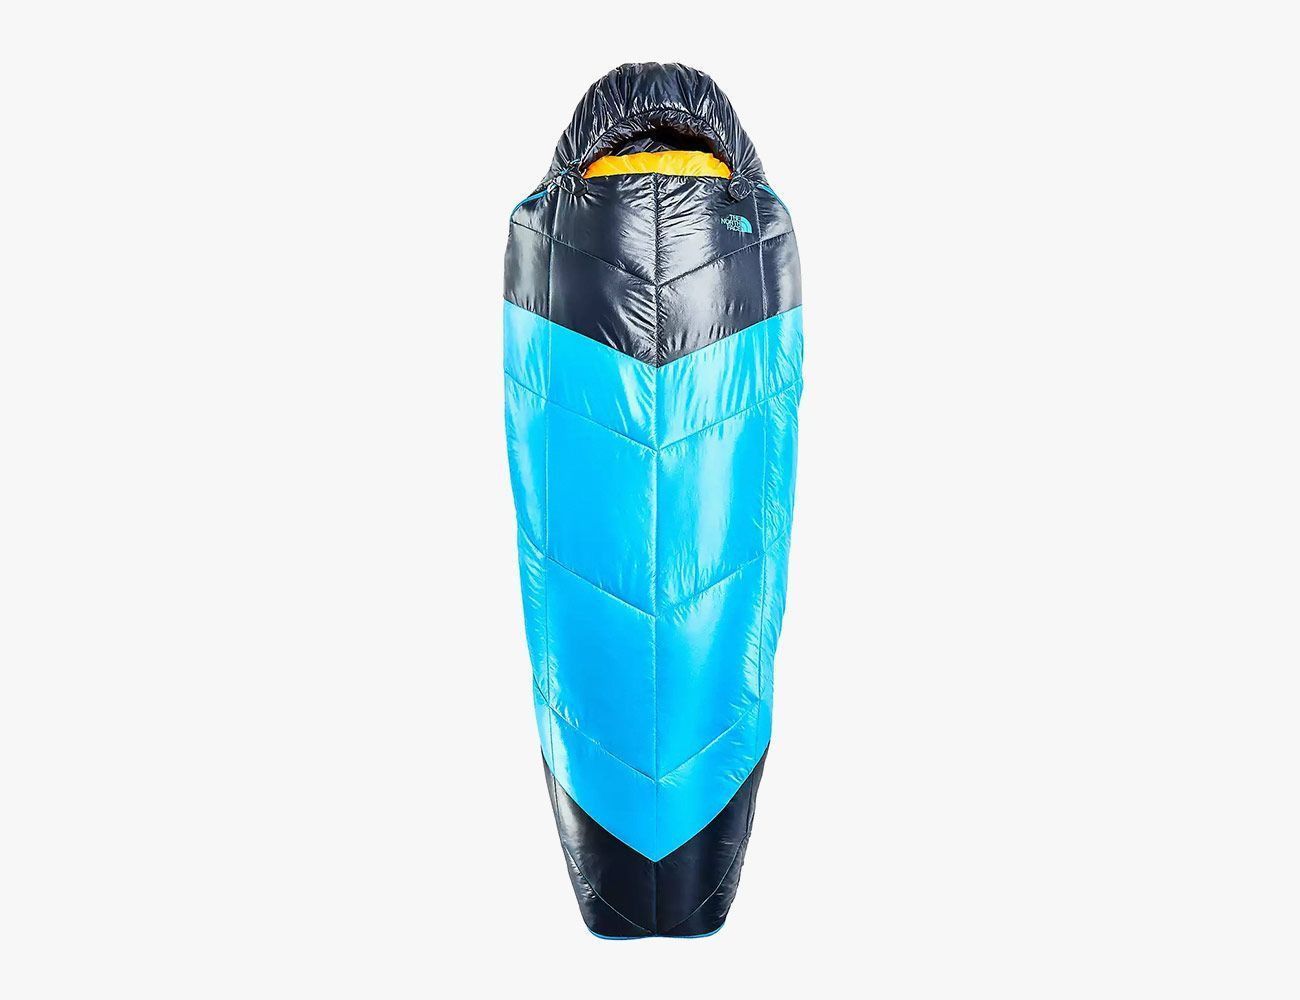 The 10 Best Sleeping Bags for Camping